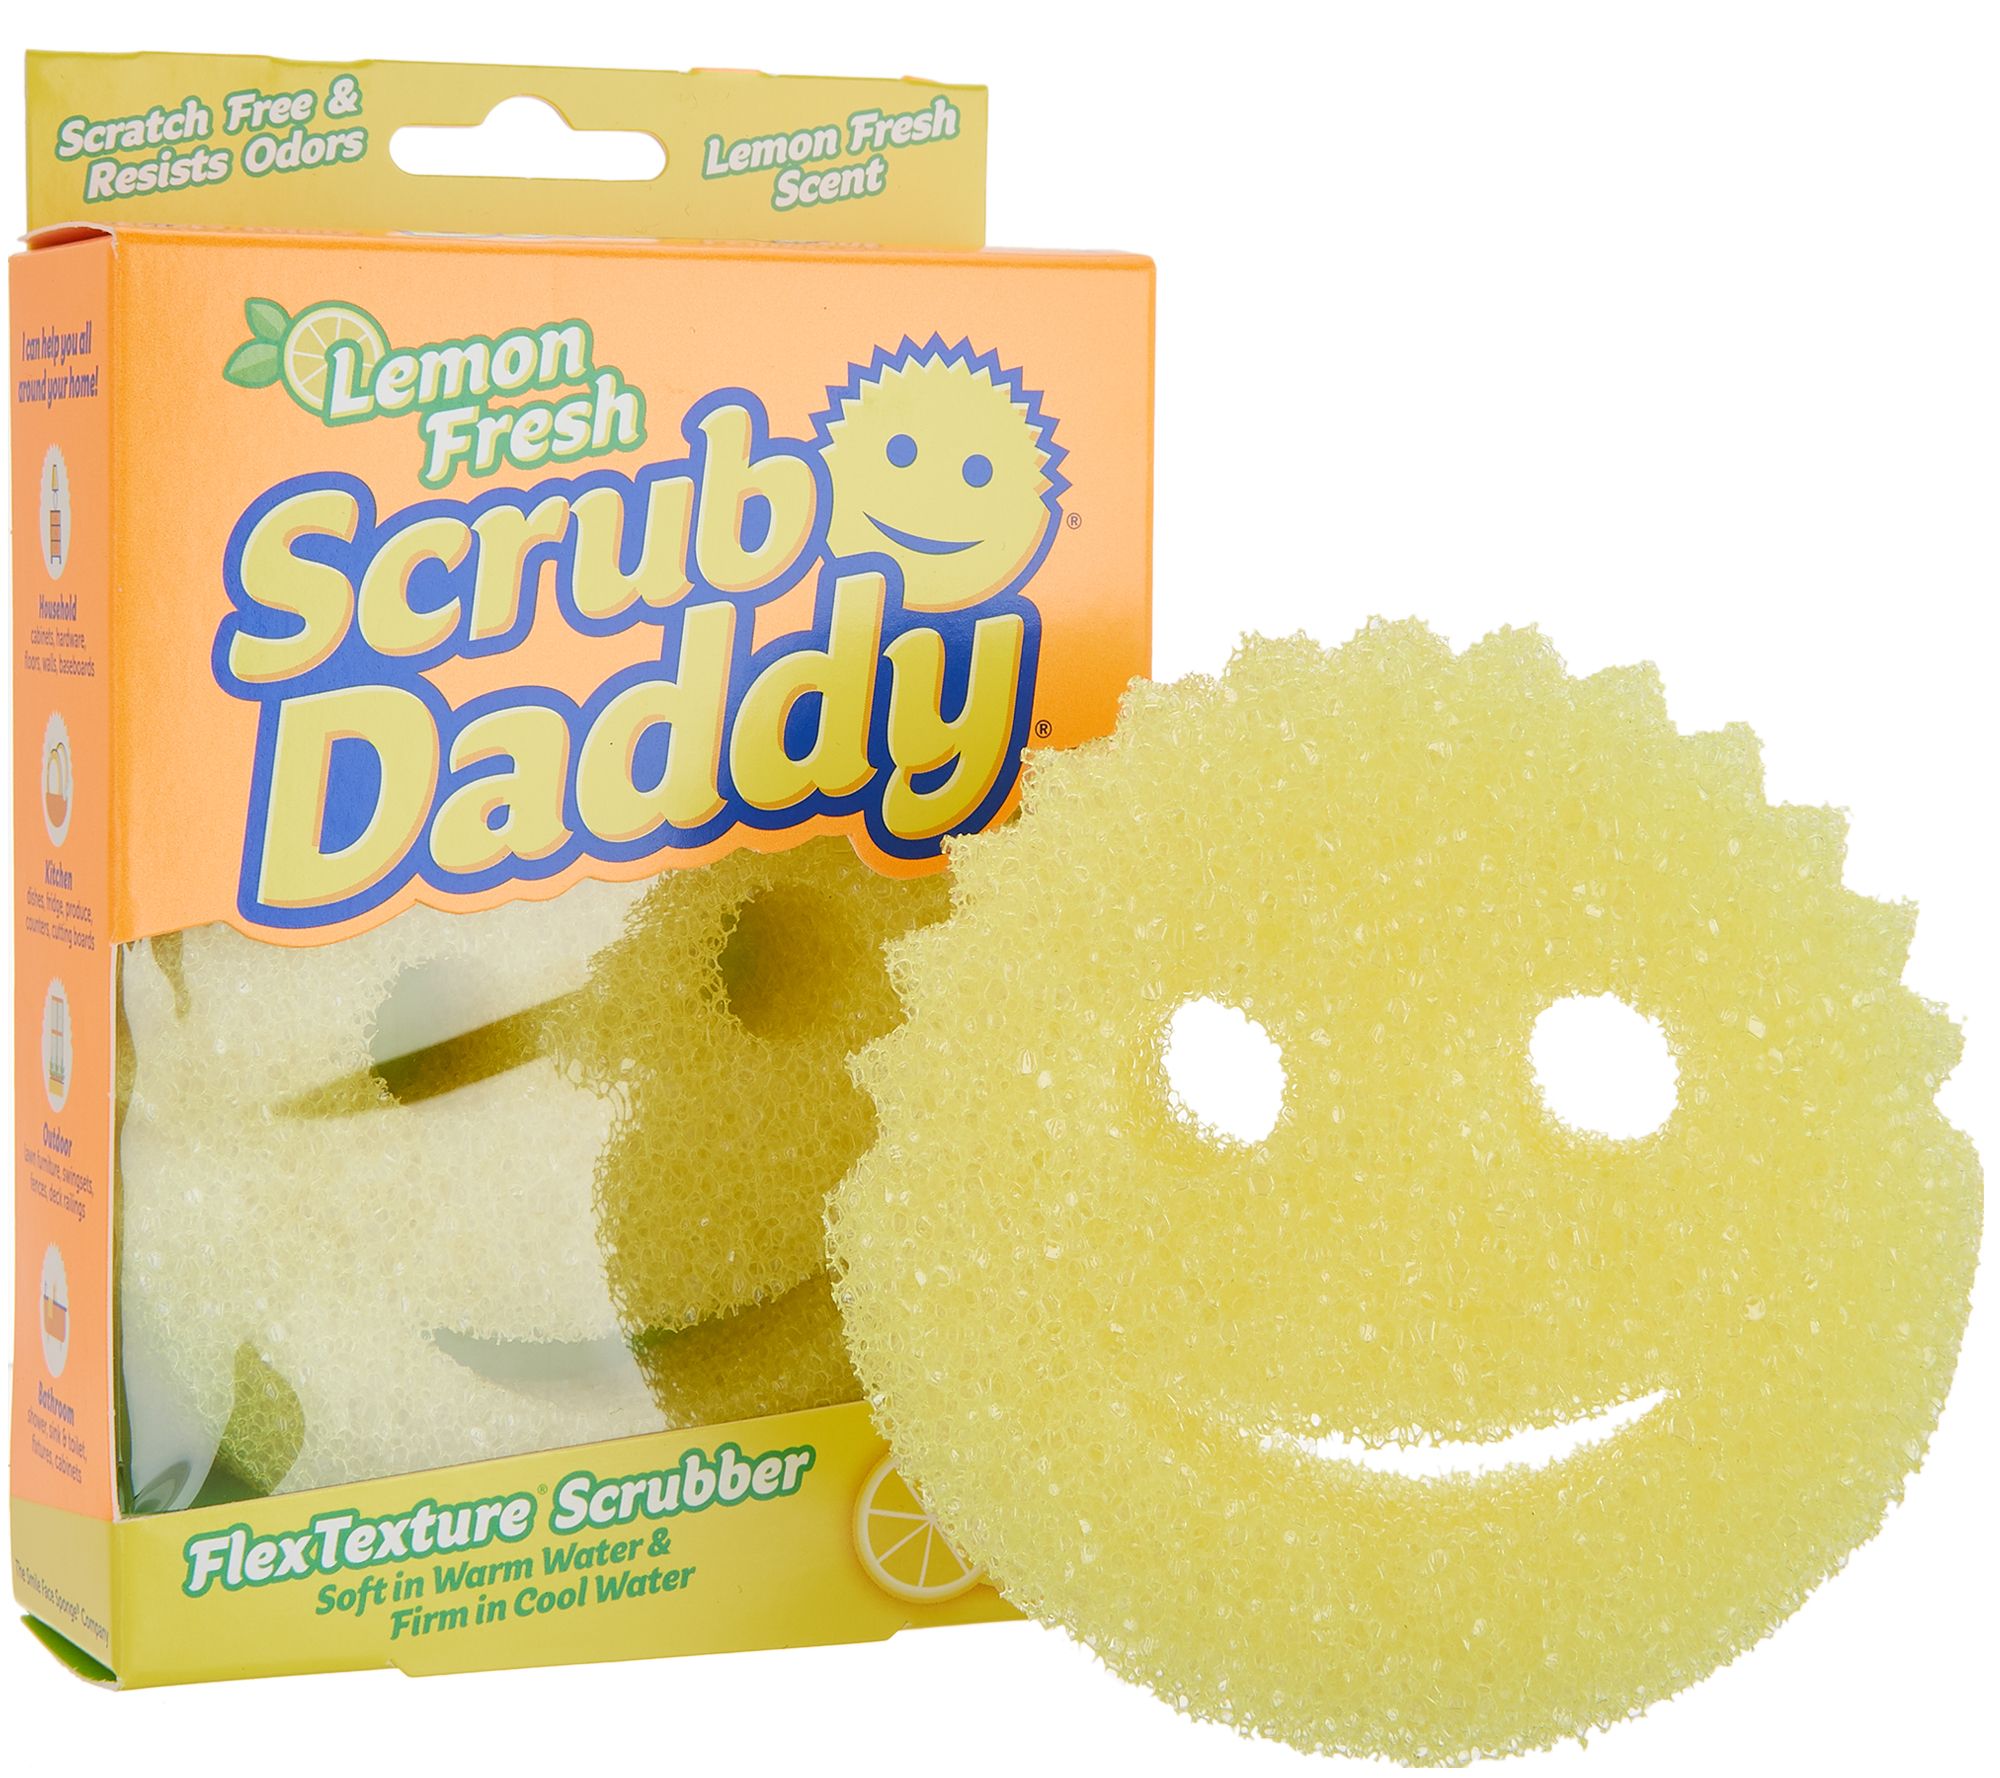 Replying to @elitenjr a few people came across my old video and i can, scrubdaddy